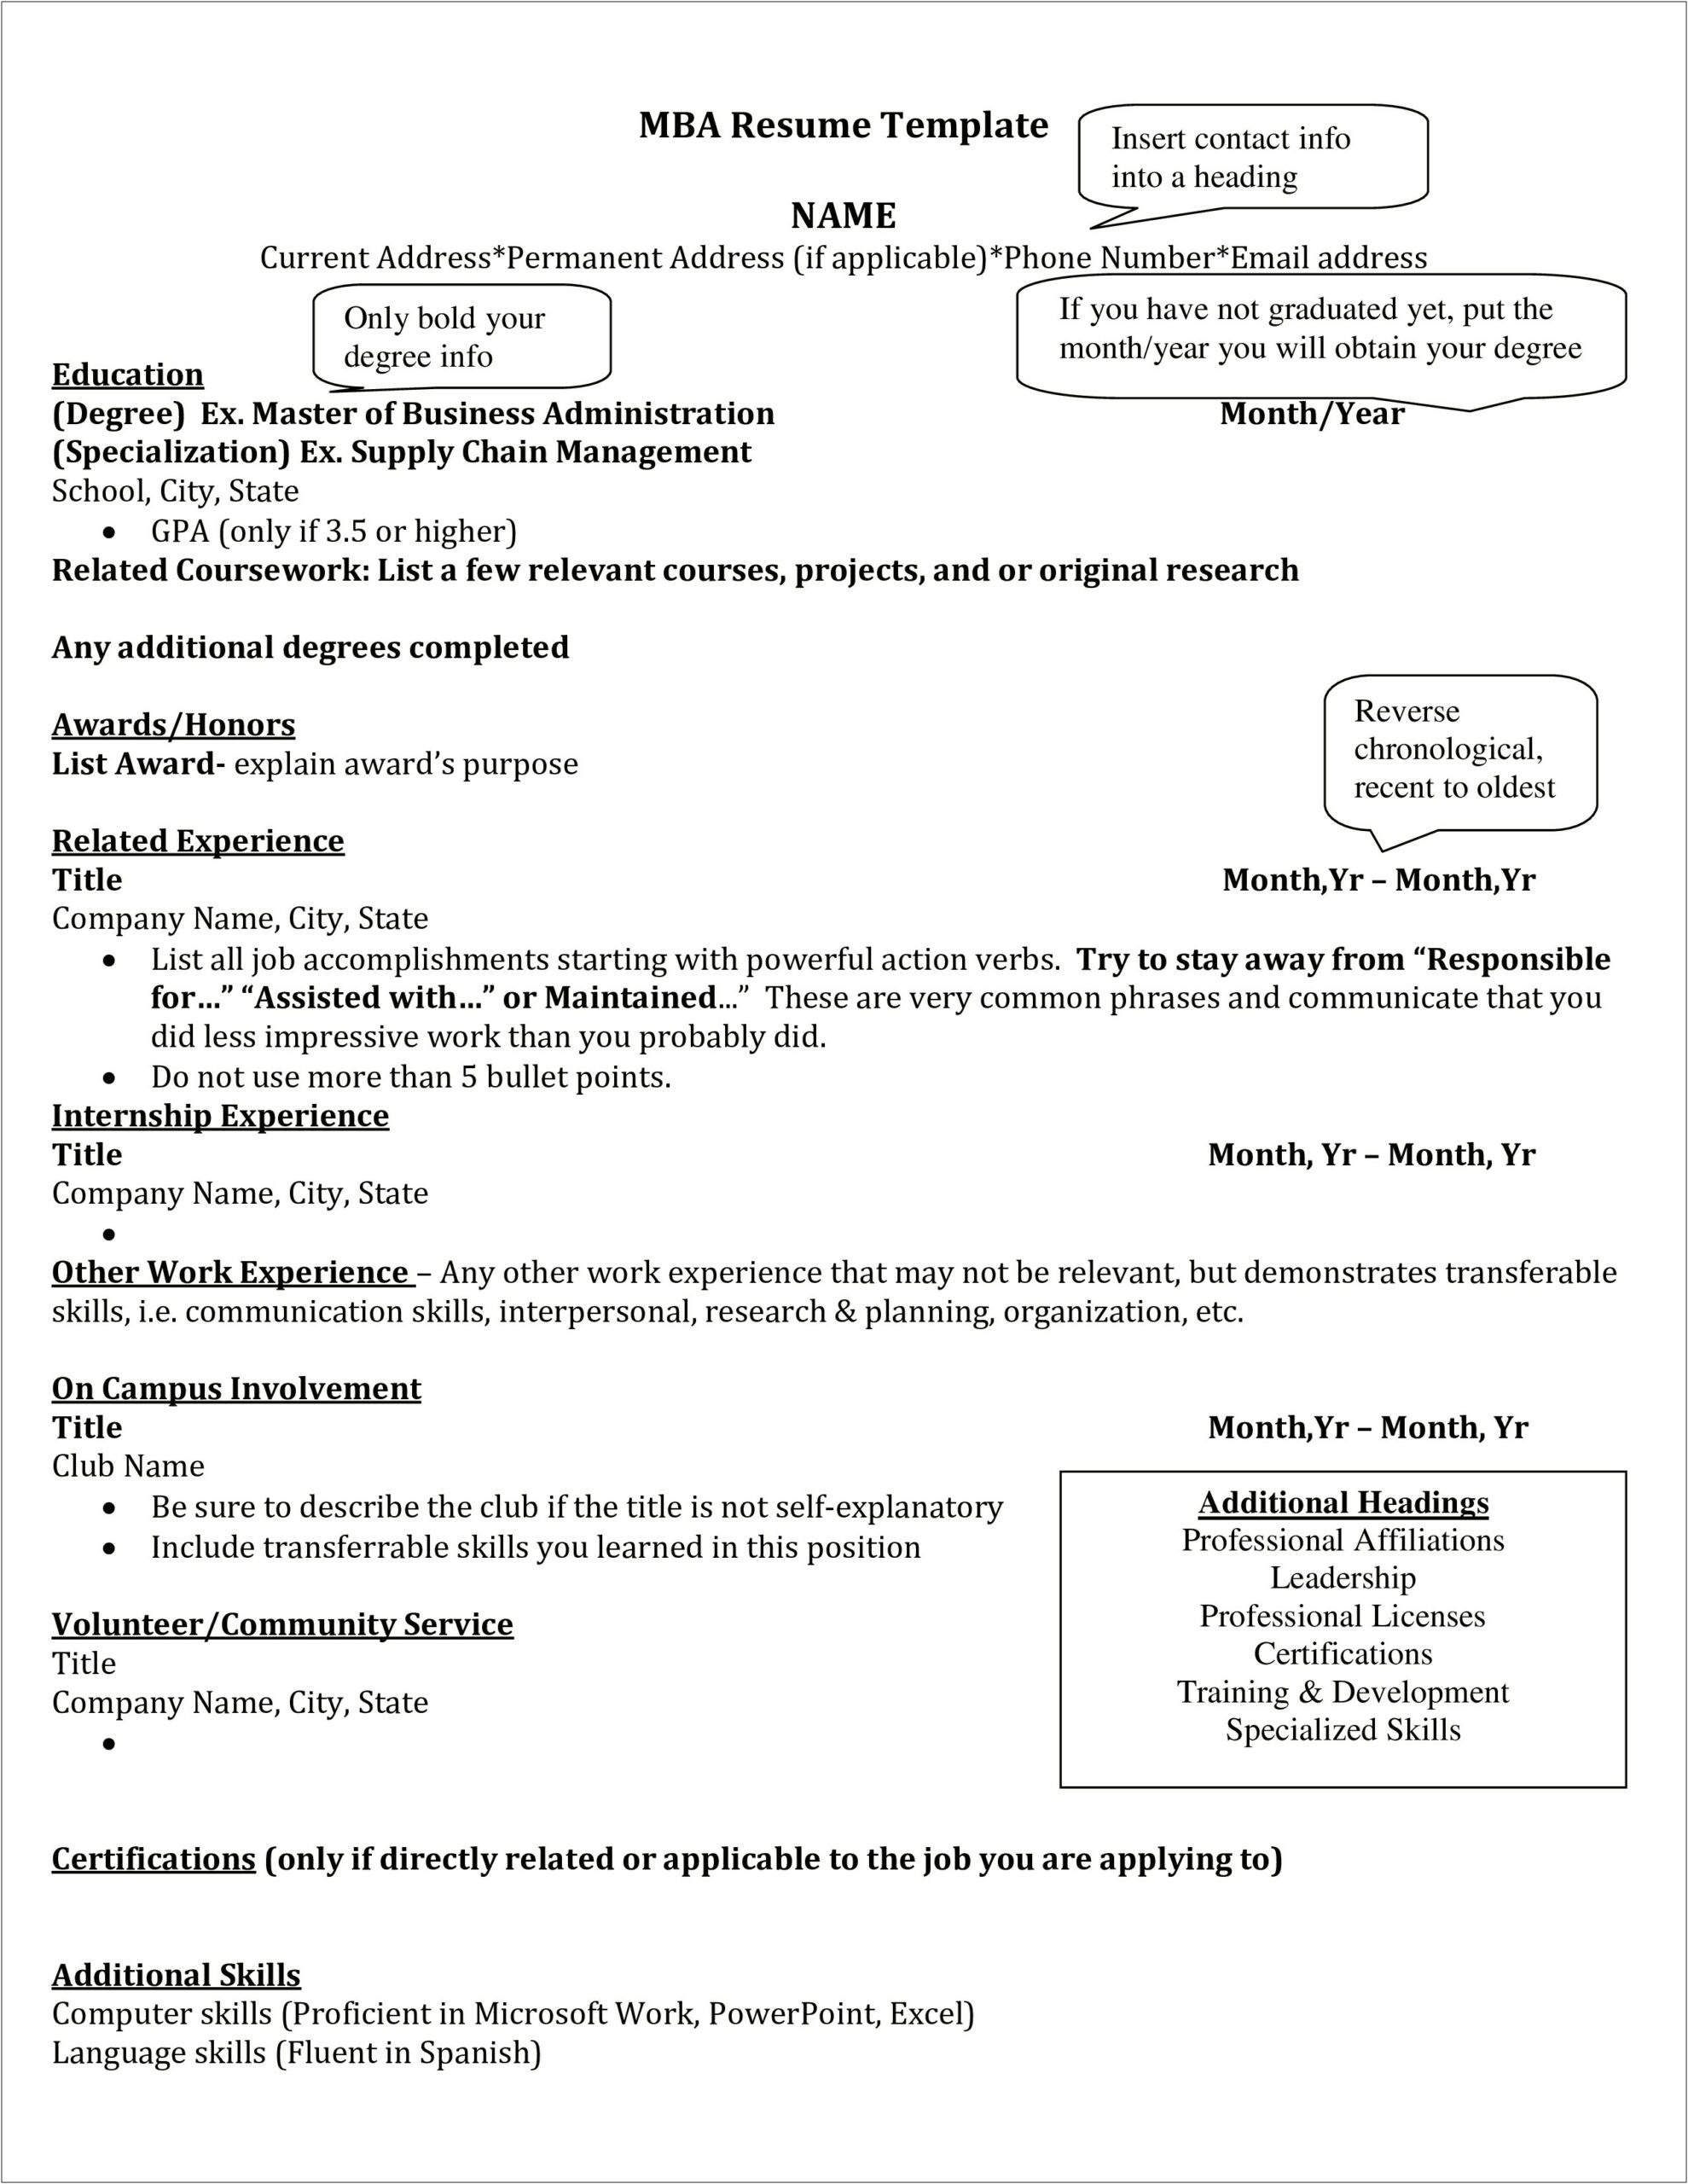 Resume Samples For Mba Freshers Free Download